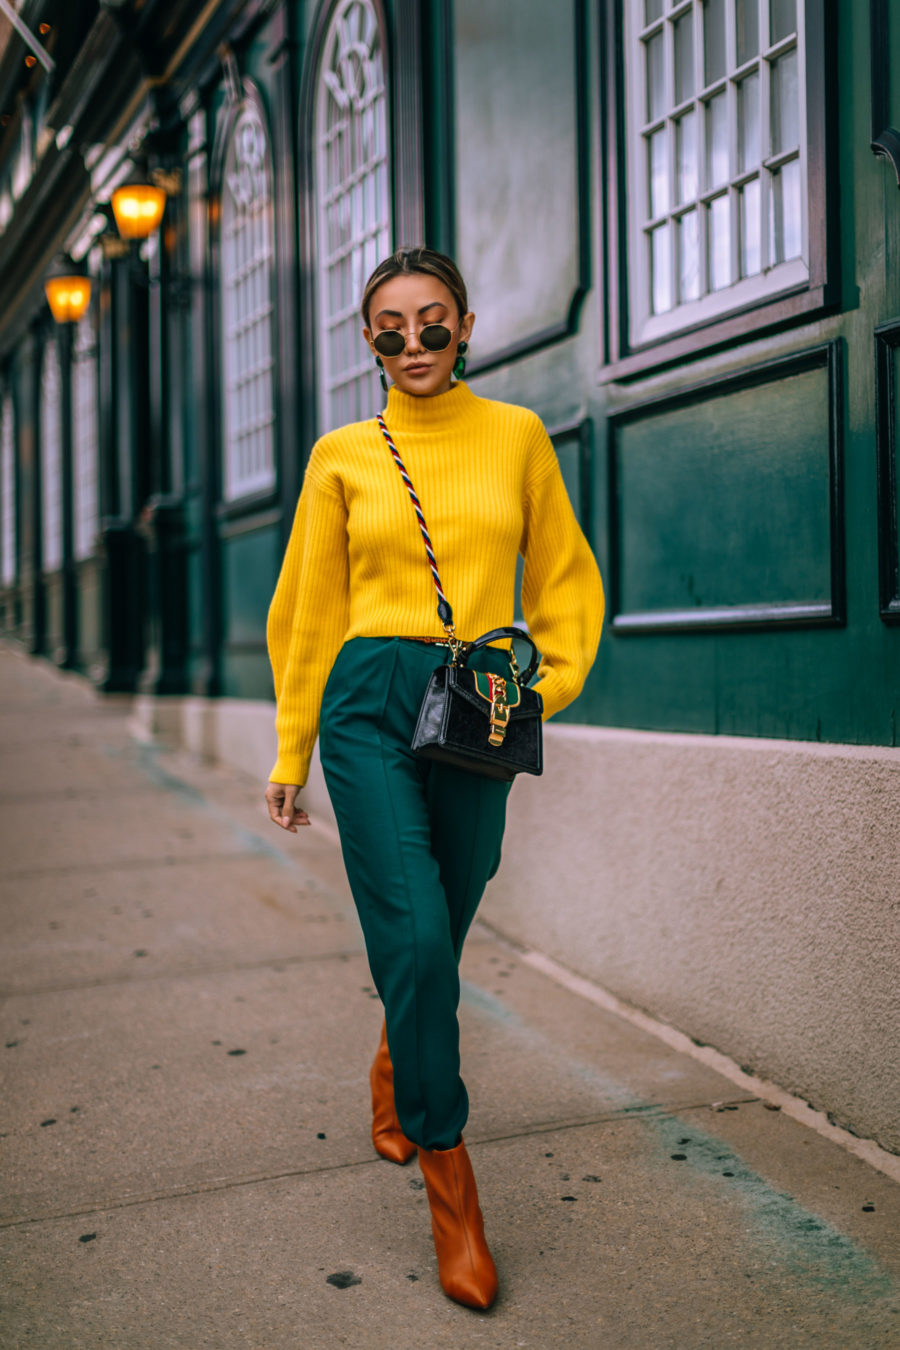 fashion blogger jessica wang wears green and yellow outfit while sharing fashionable tech accessories // Jessica Wang - Notjessfashion.com